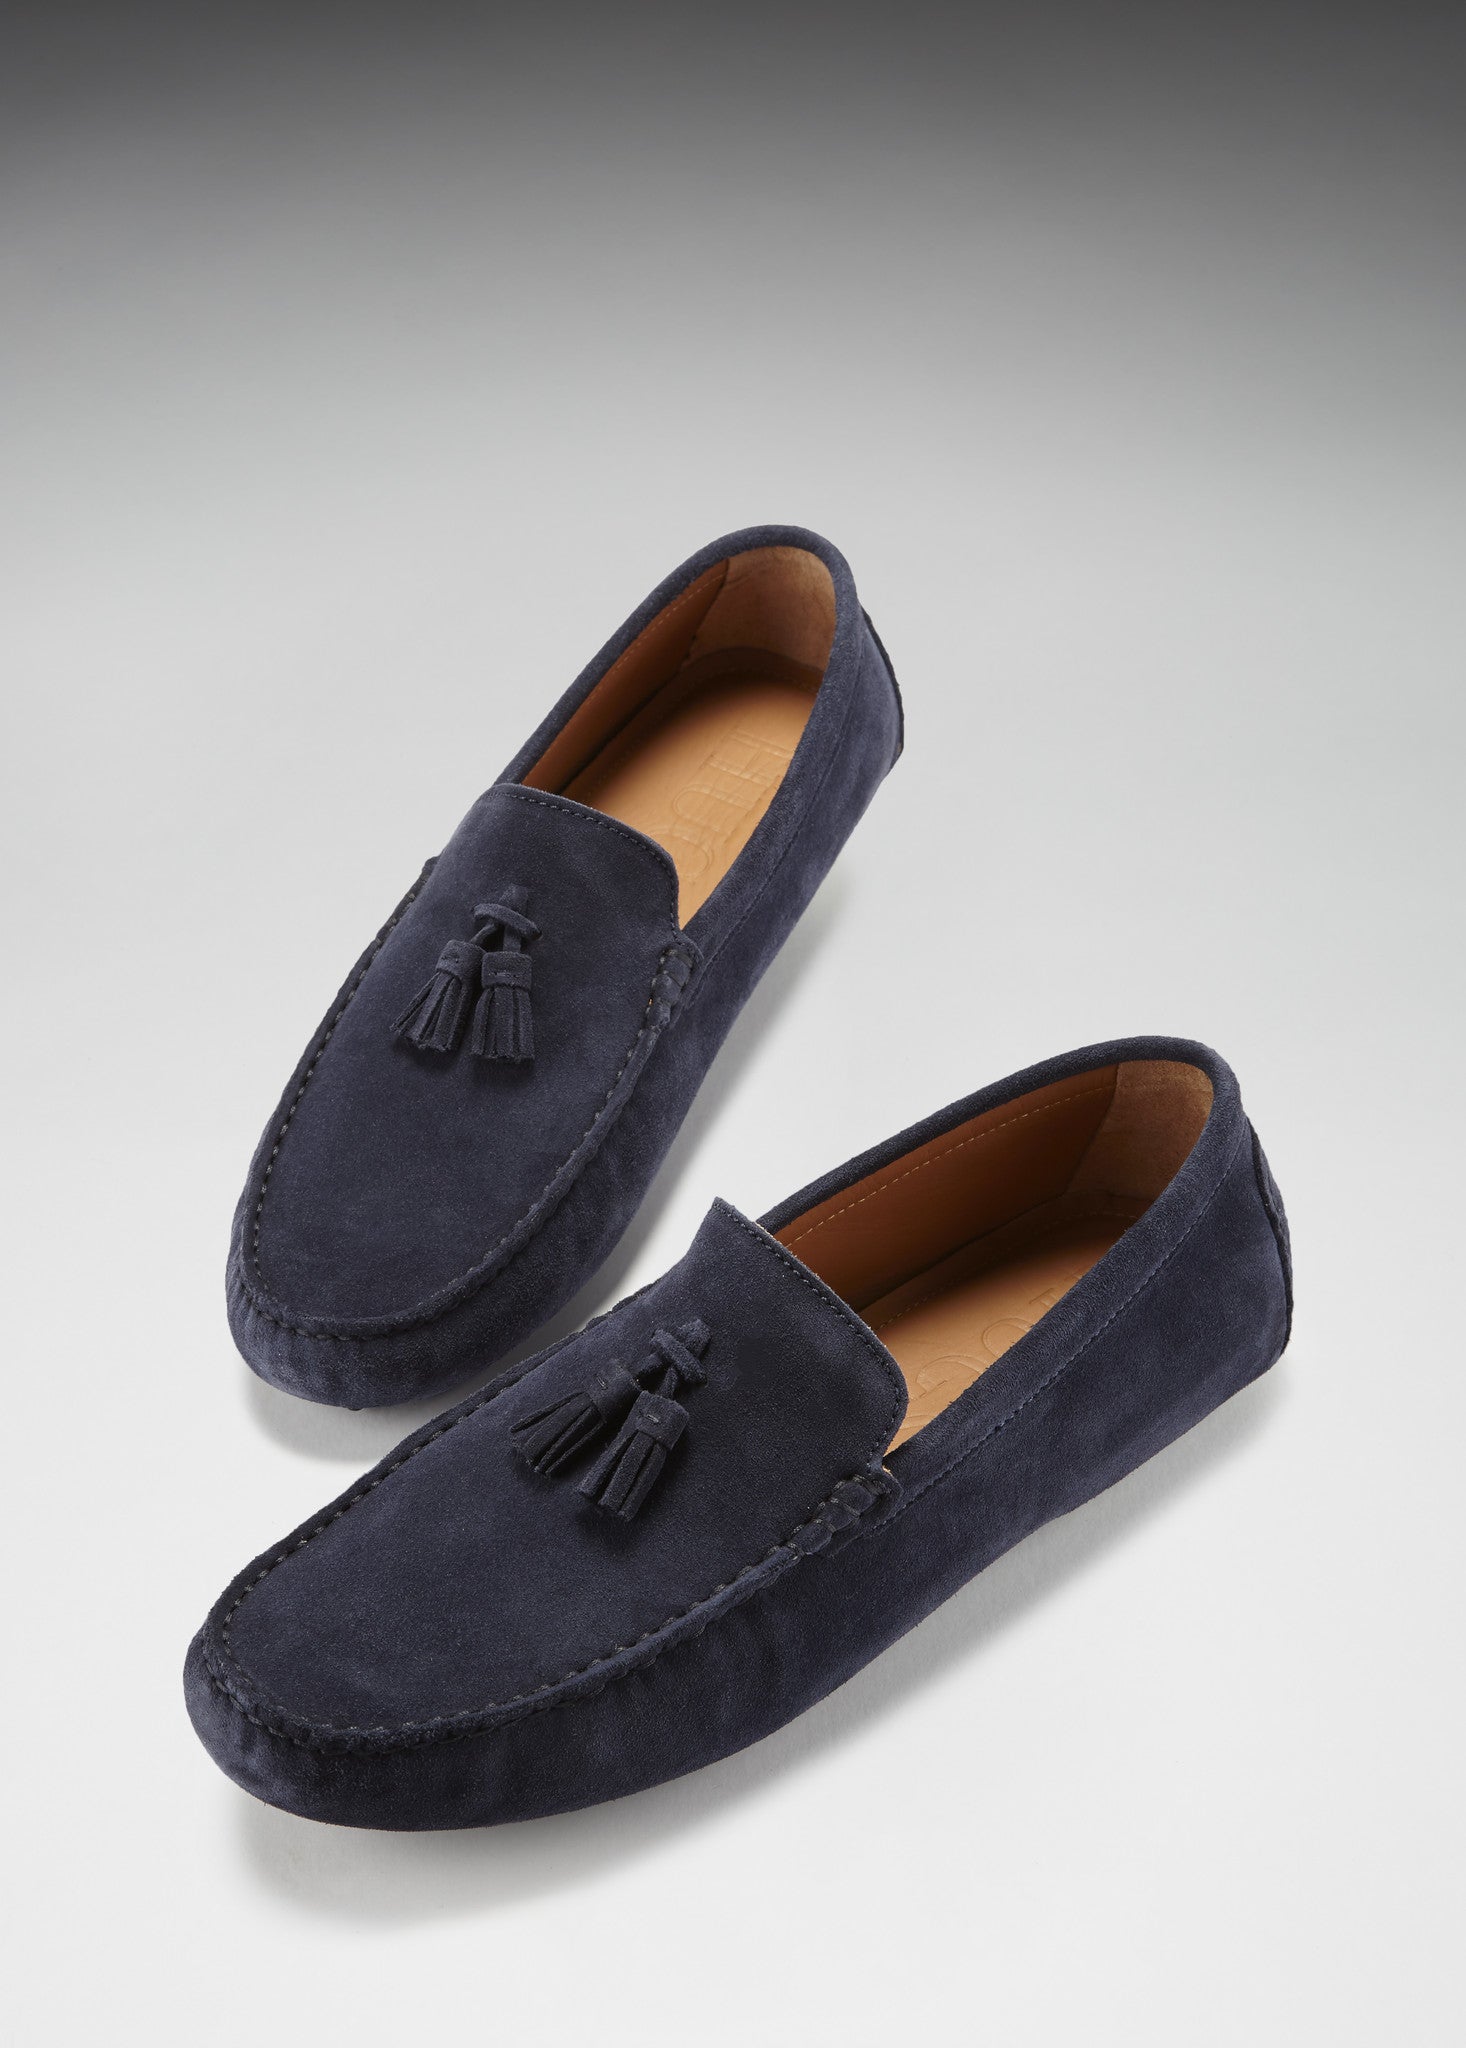 Tasselled Driving Loafers, navy blue suede